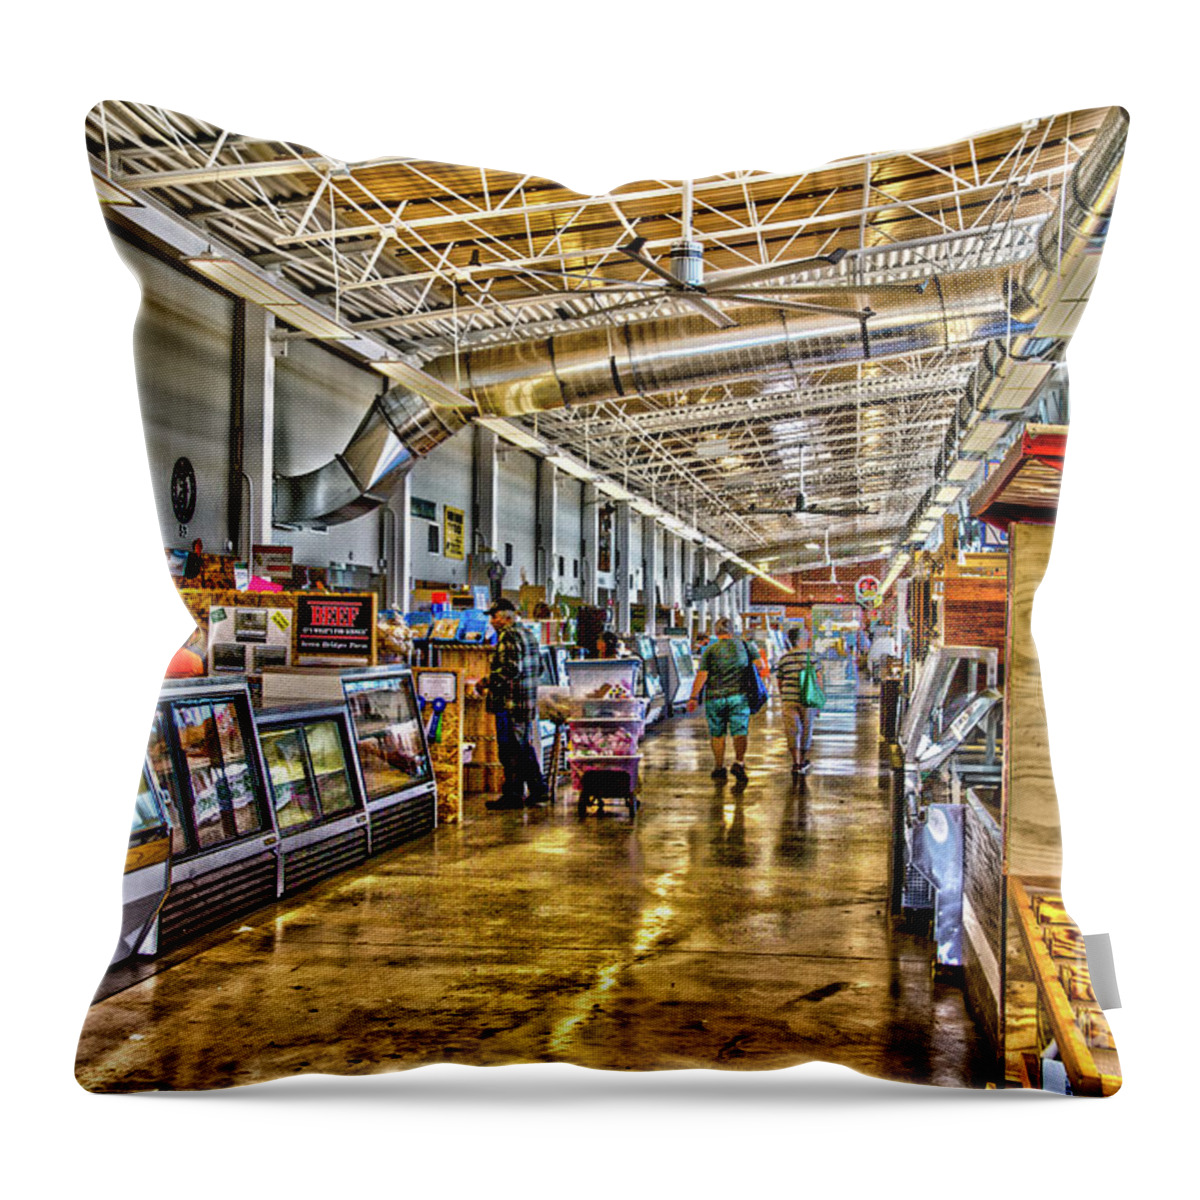 Farmers Market Throw Pillow featuring the photograph Indoor Market by William Norton